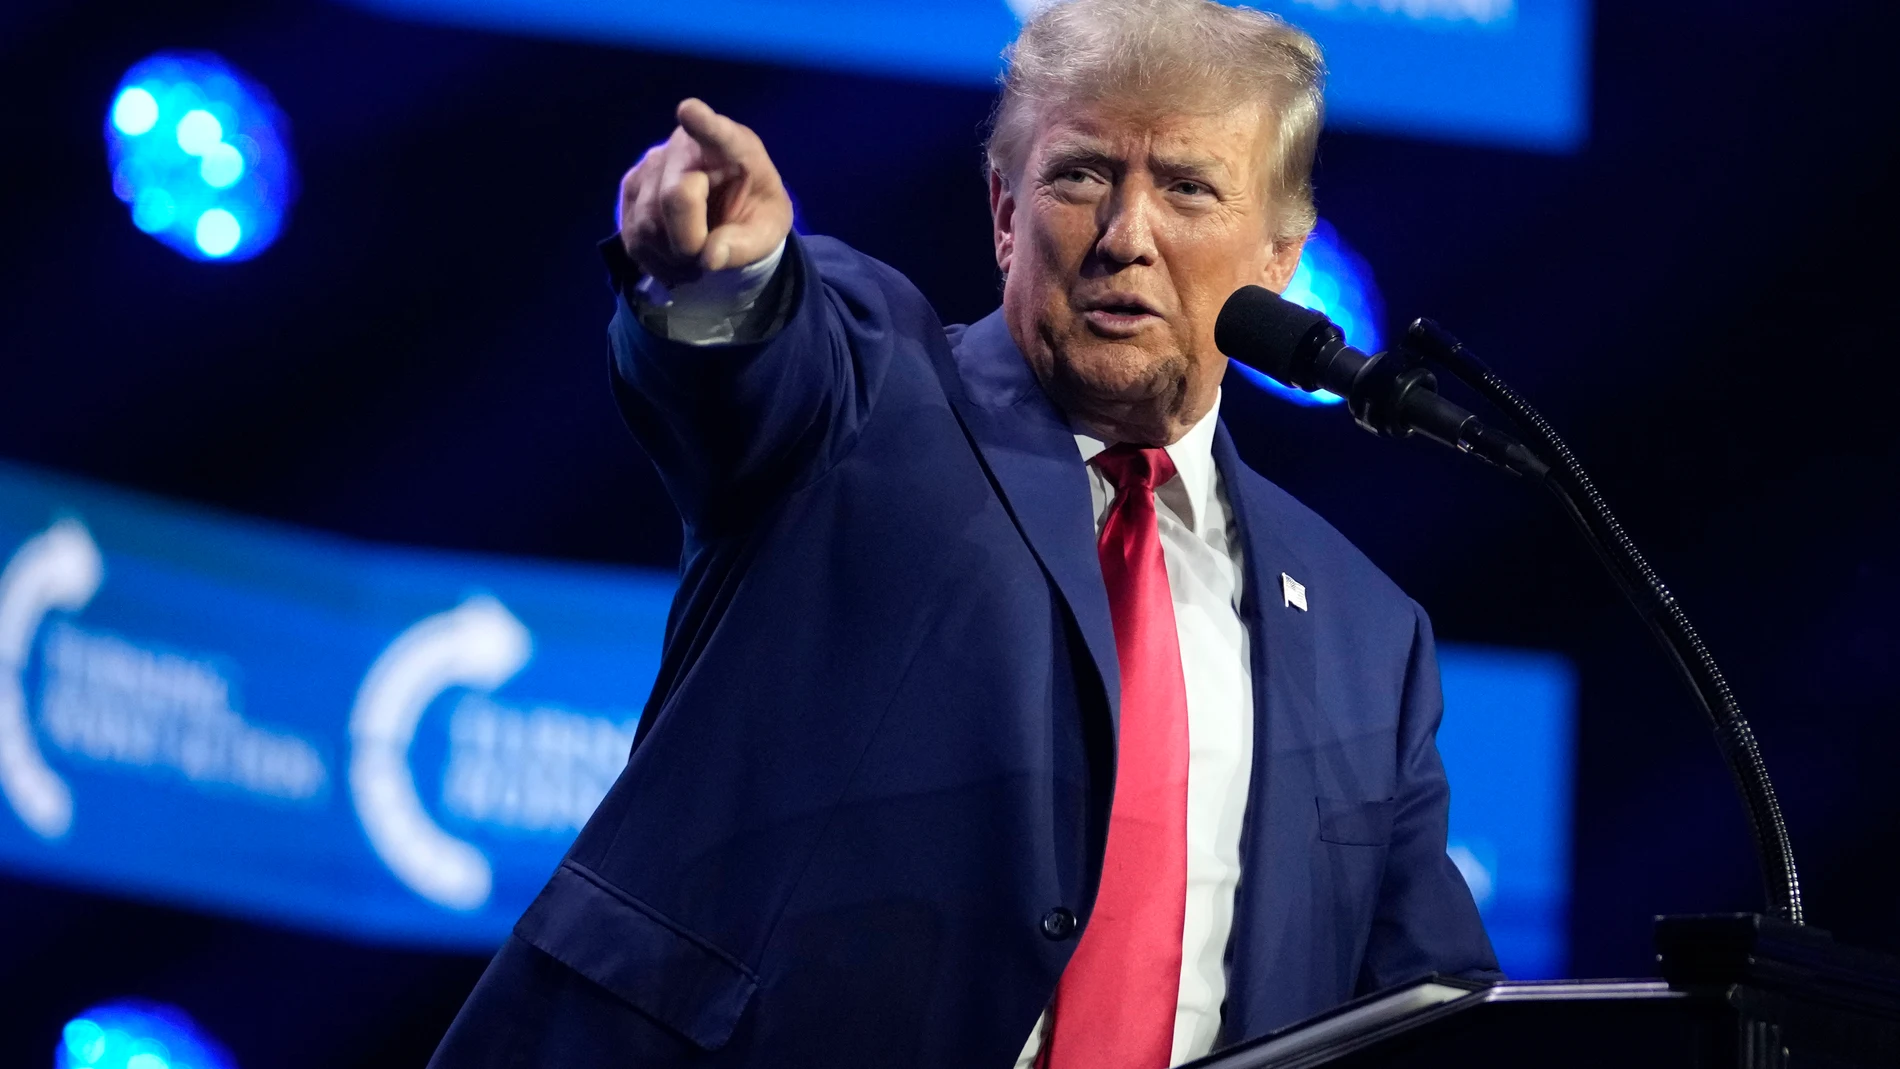 Former President Donald Trump speaks at the Turning Point Action conference, Saturday, July 15, 2023, in West Palm Beach, Fla. (AP Photo/Lynne Sladky)